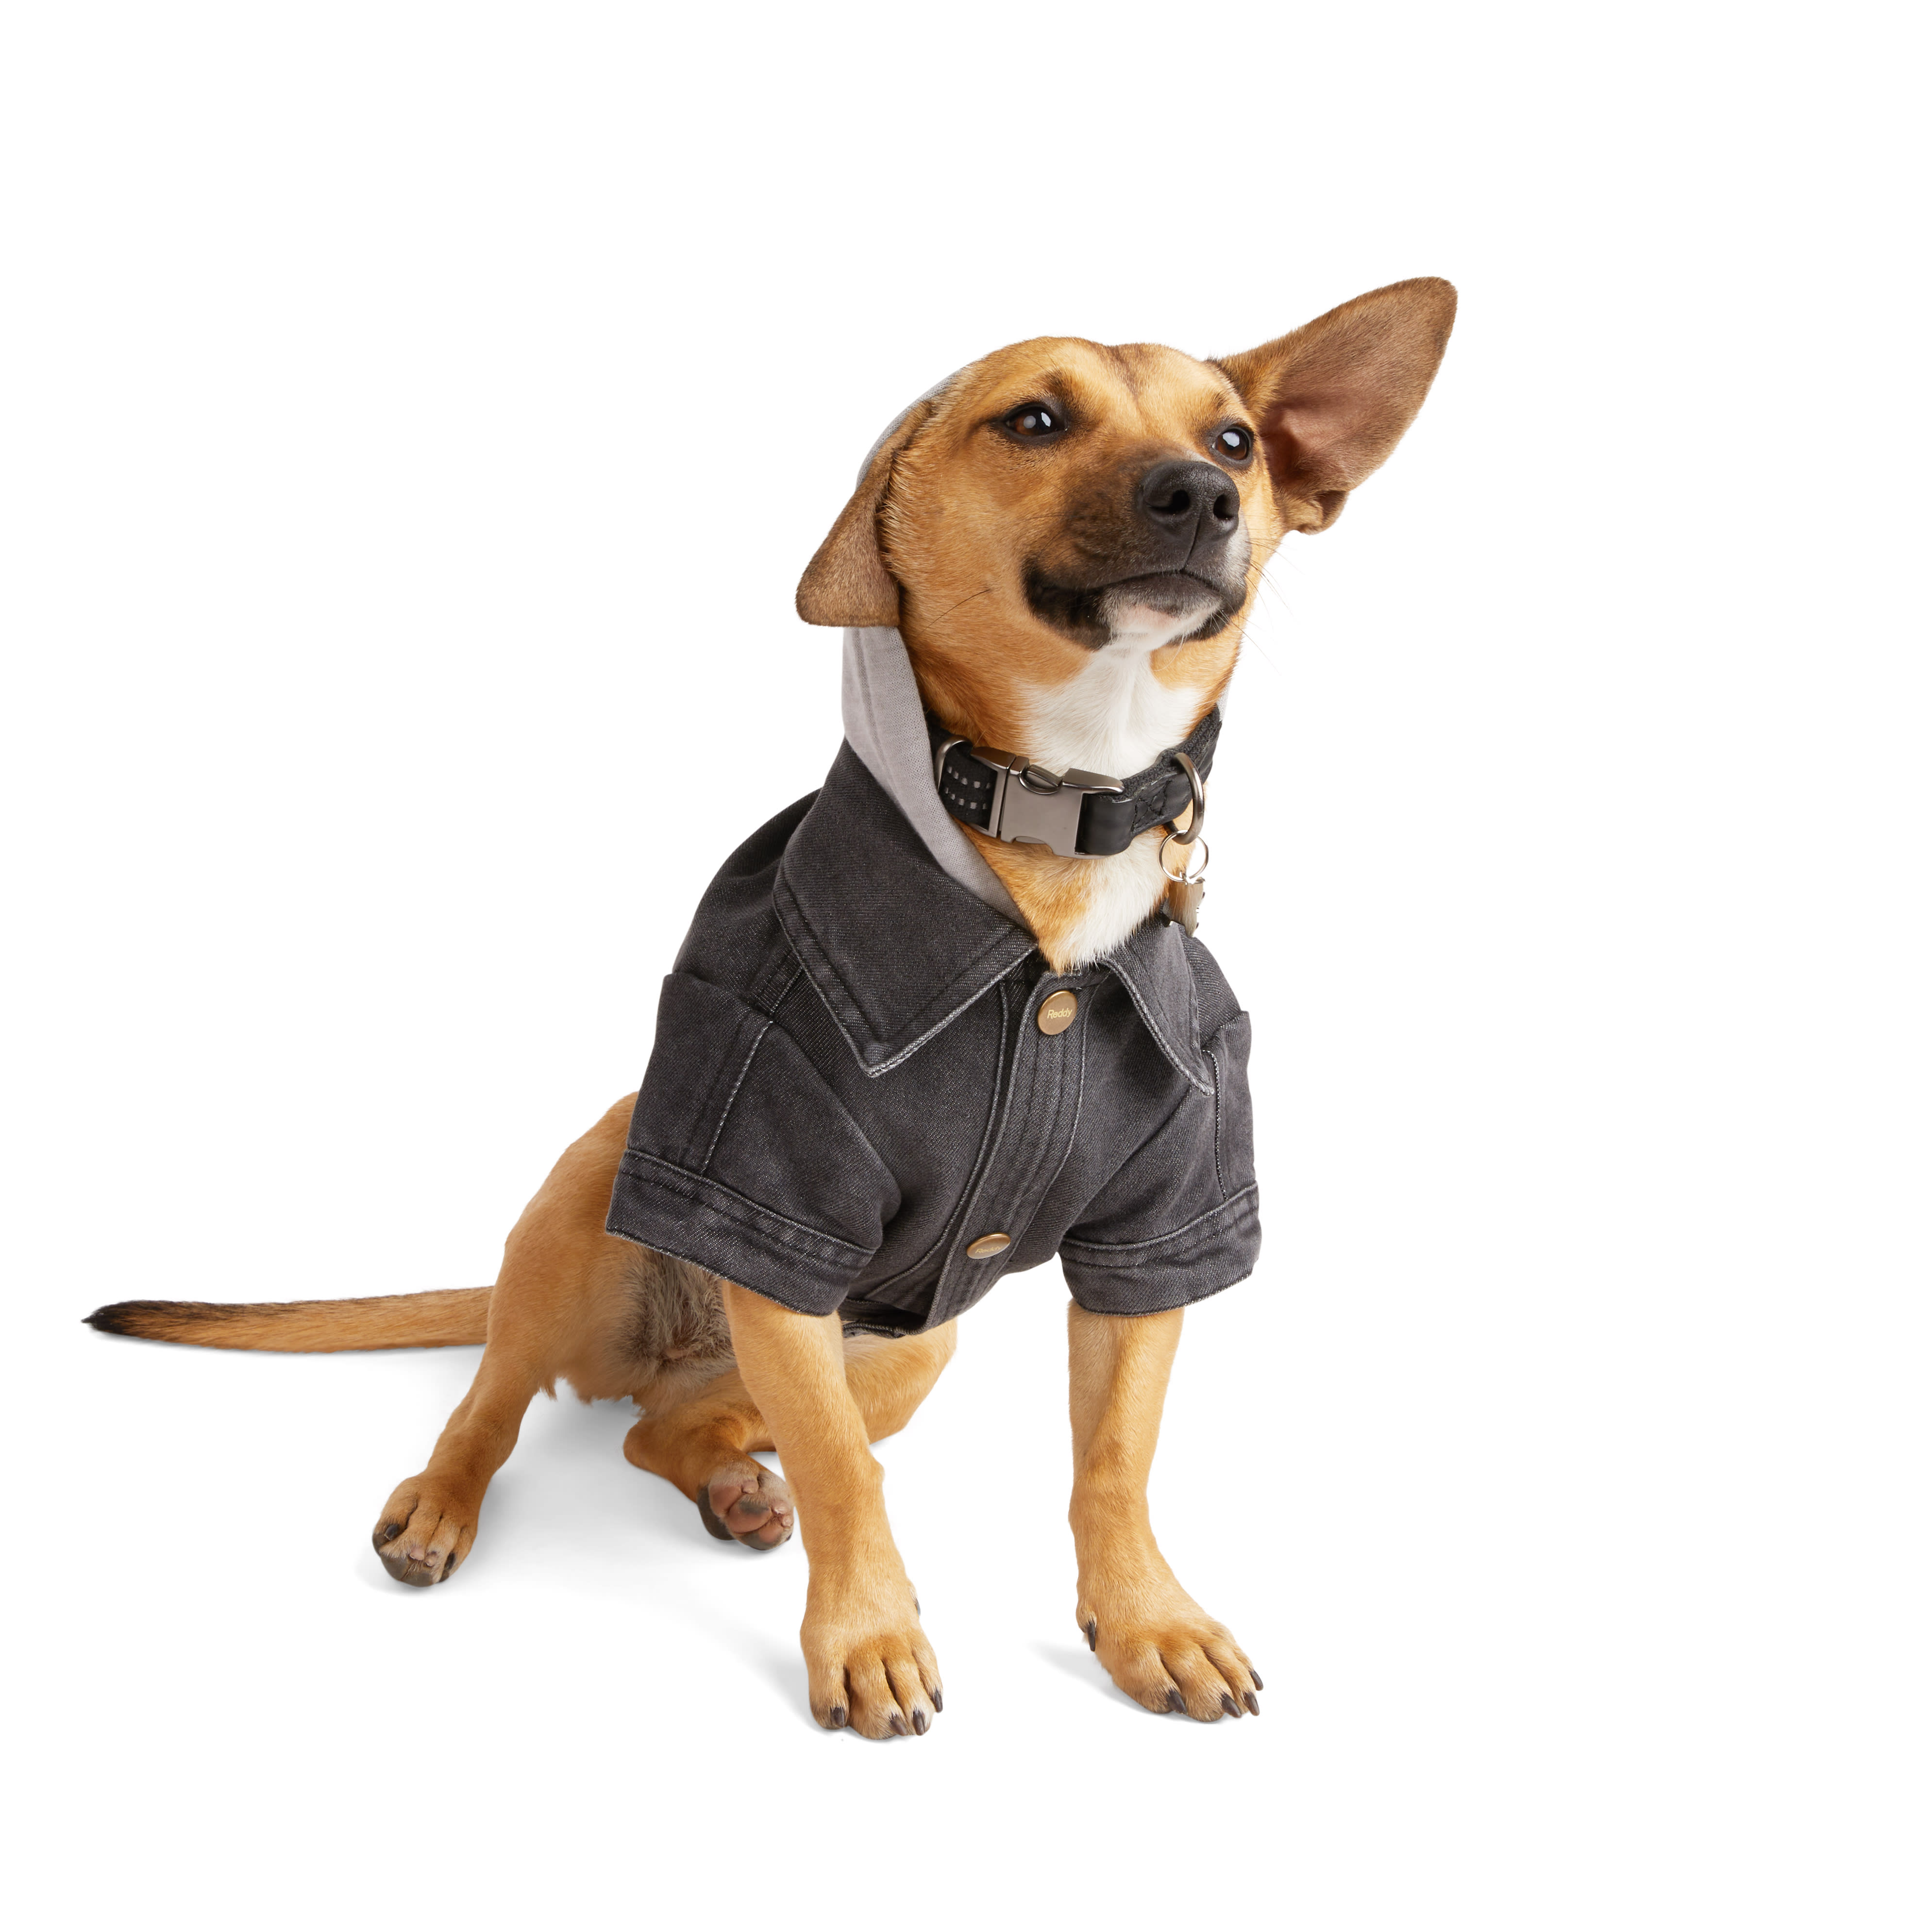 Chewy V Denim Dog Jacket  Trendy Outerwear for Your Pet